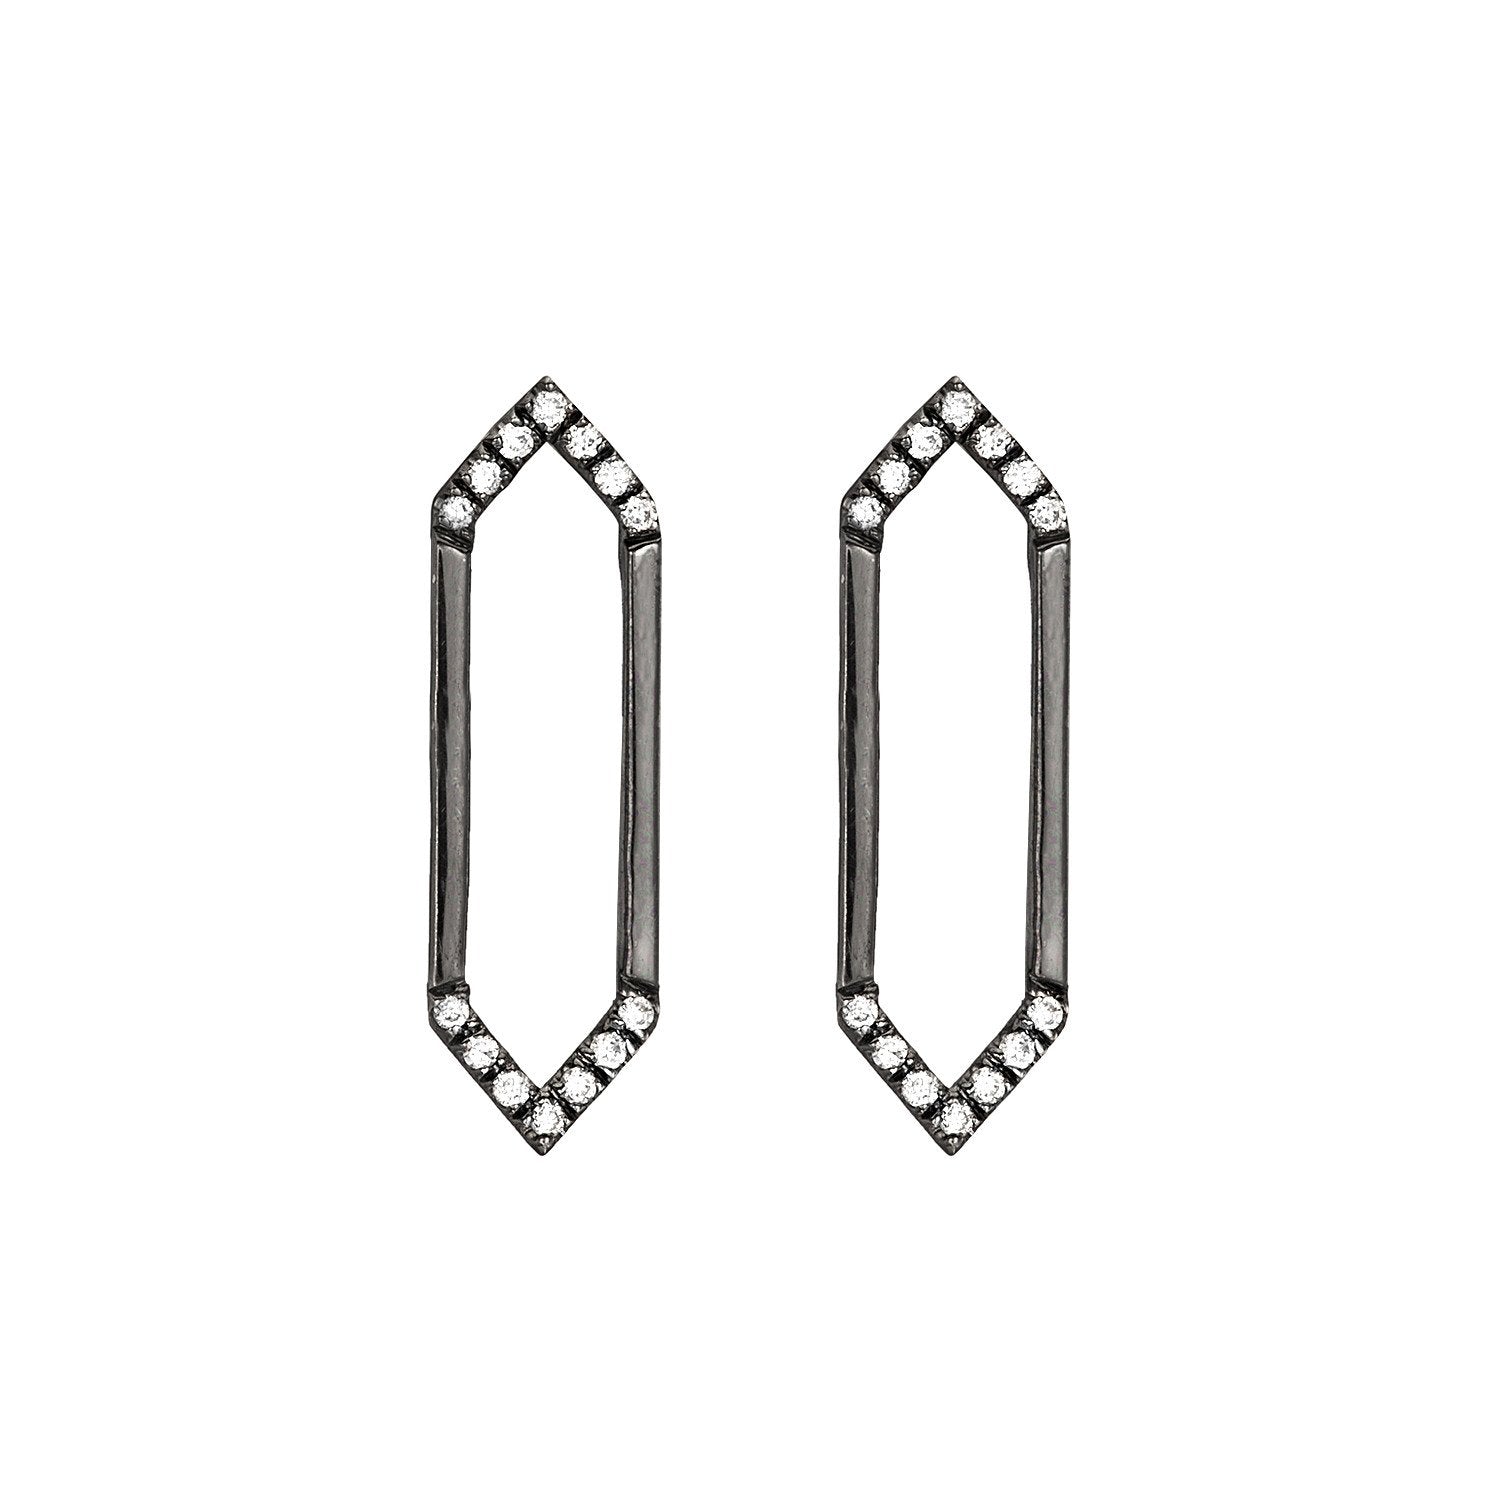 Medium Marquis Earrings | Black Gold with Diamond Points